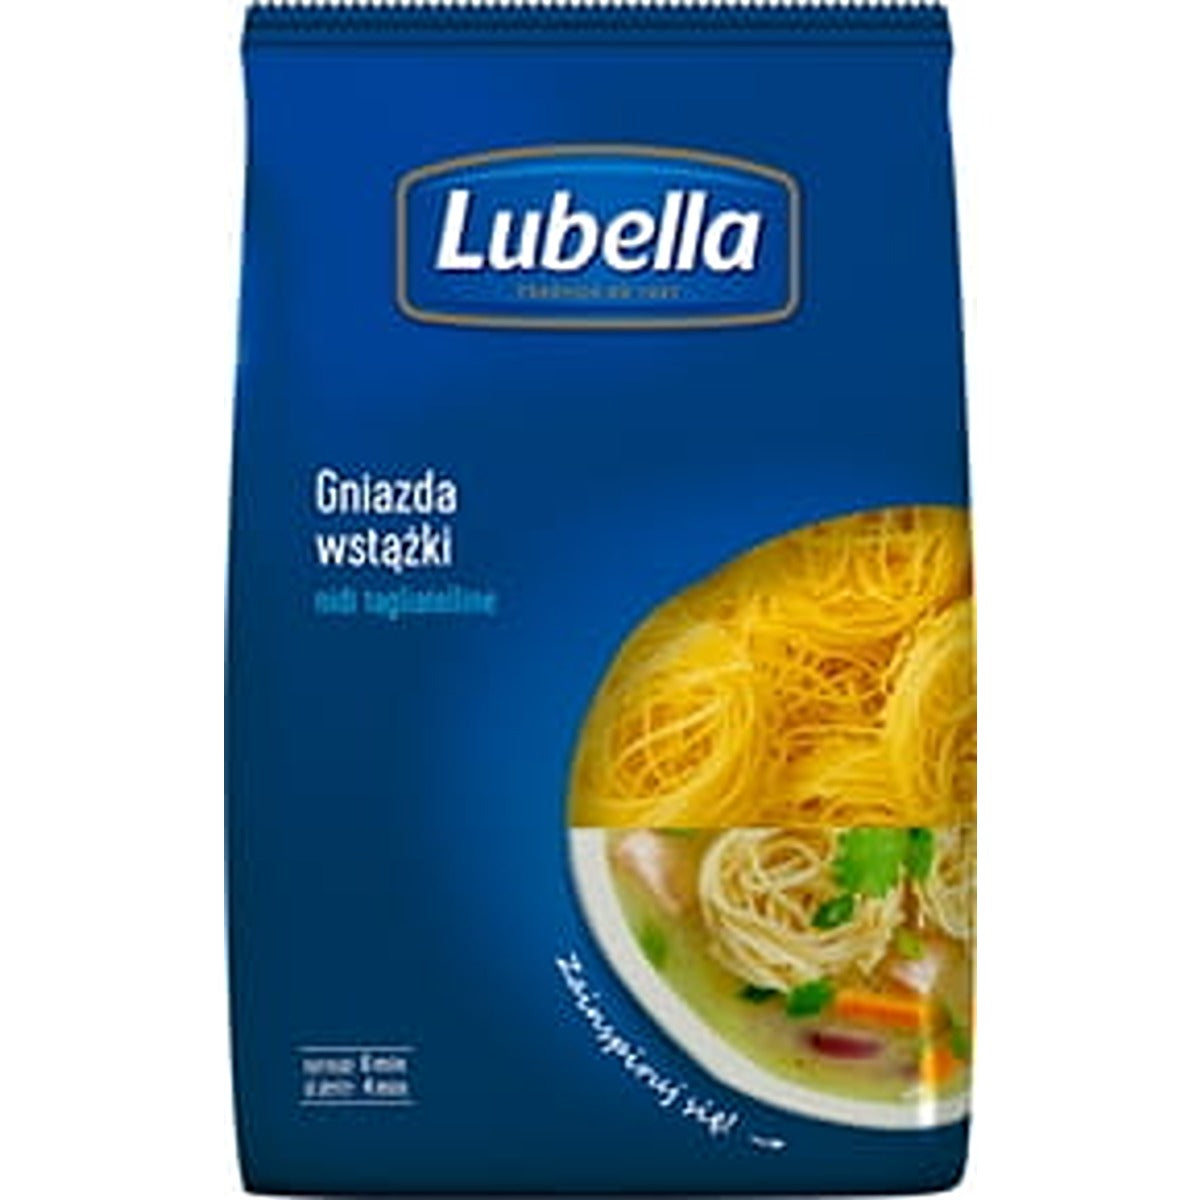 Lubella - Pasta Nests - 400g noodles in a bag.